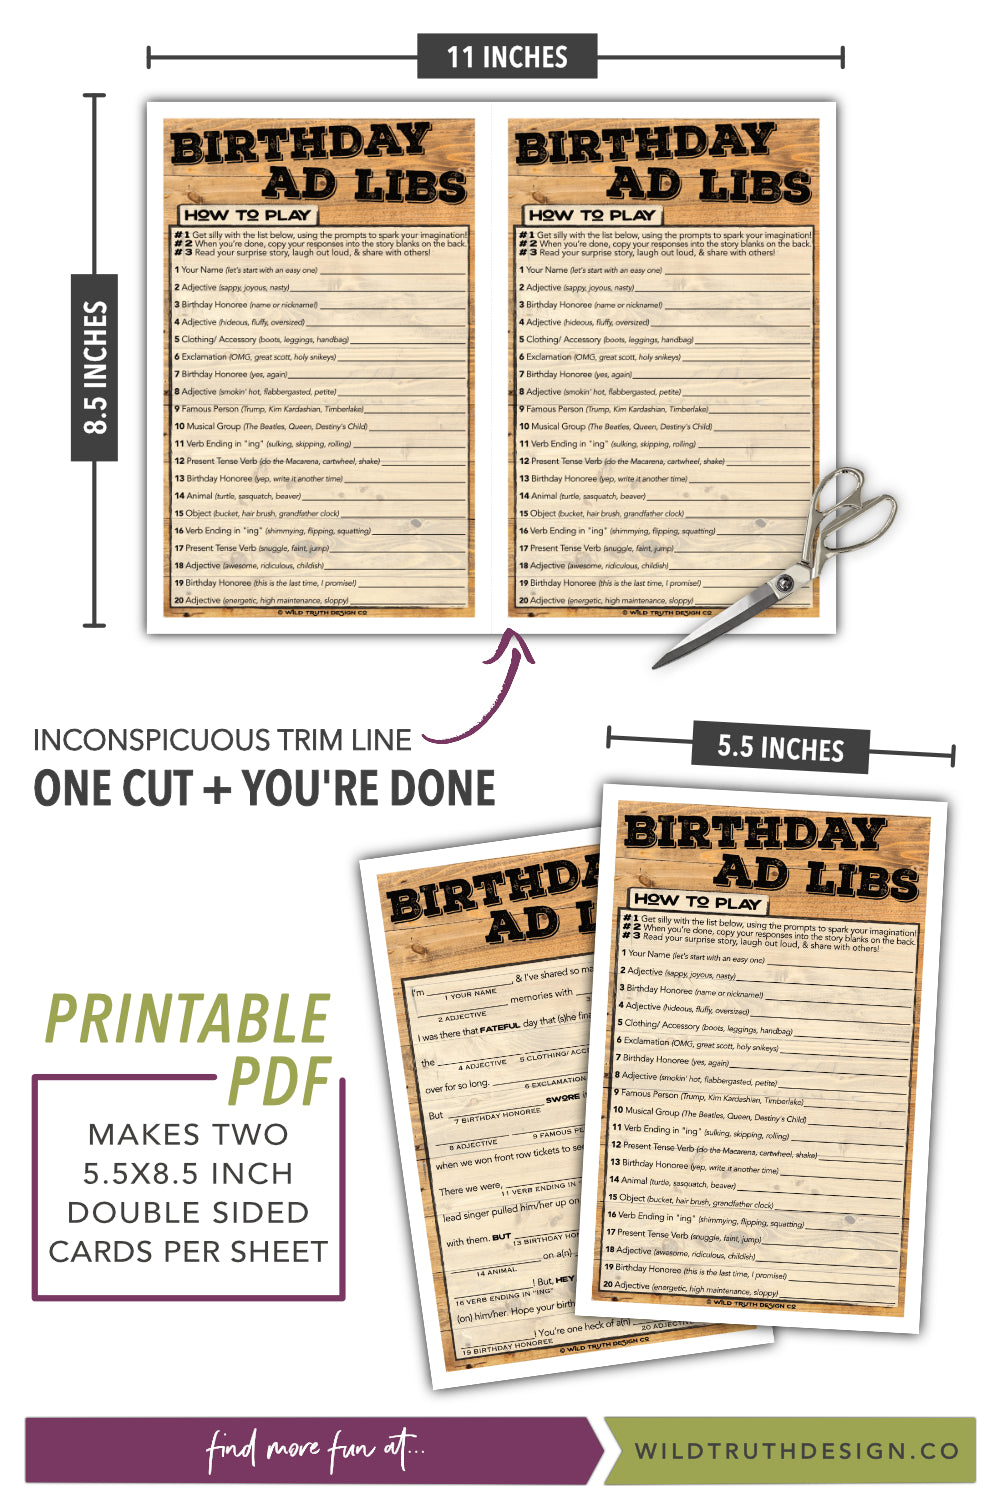 Printable Birthday Mad Libs Party Game For Adults Teens by Wild Truth Design Co